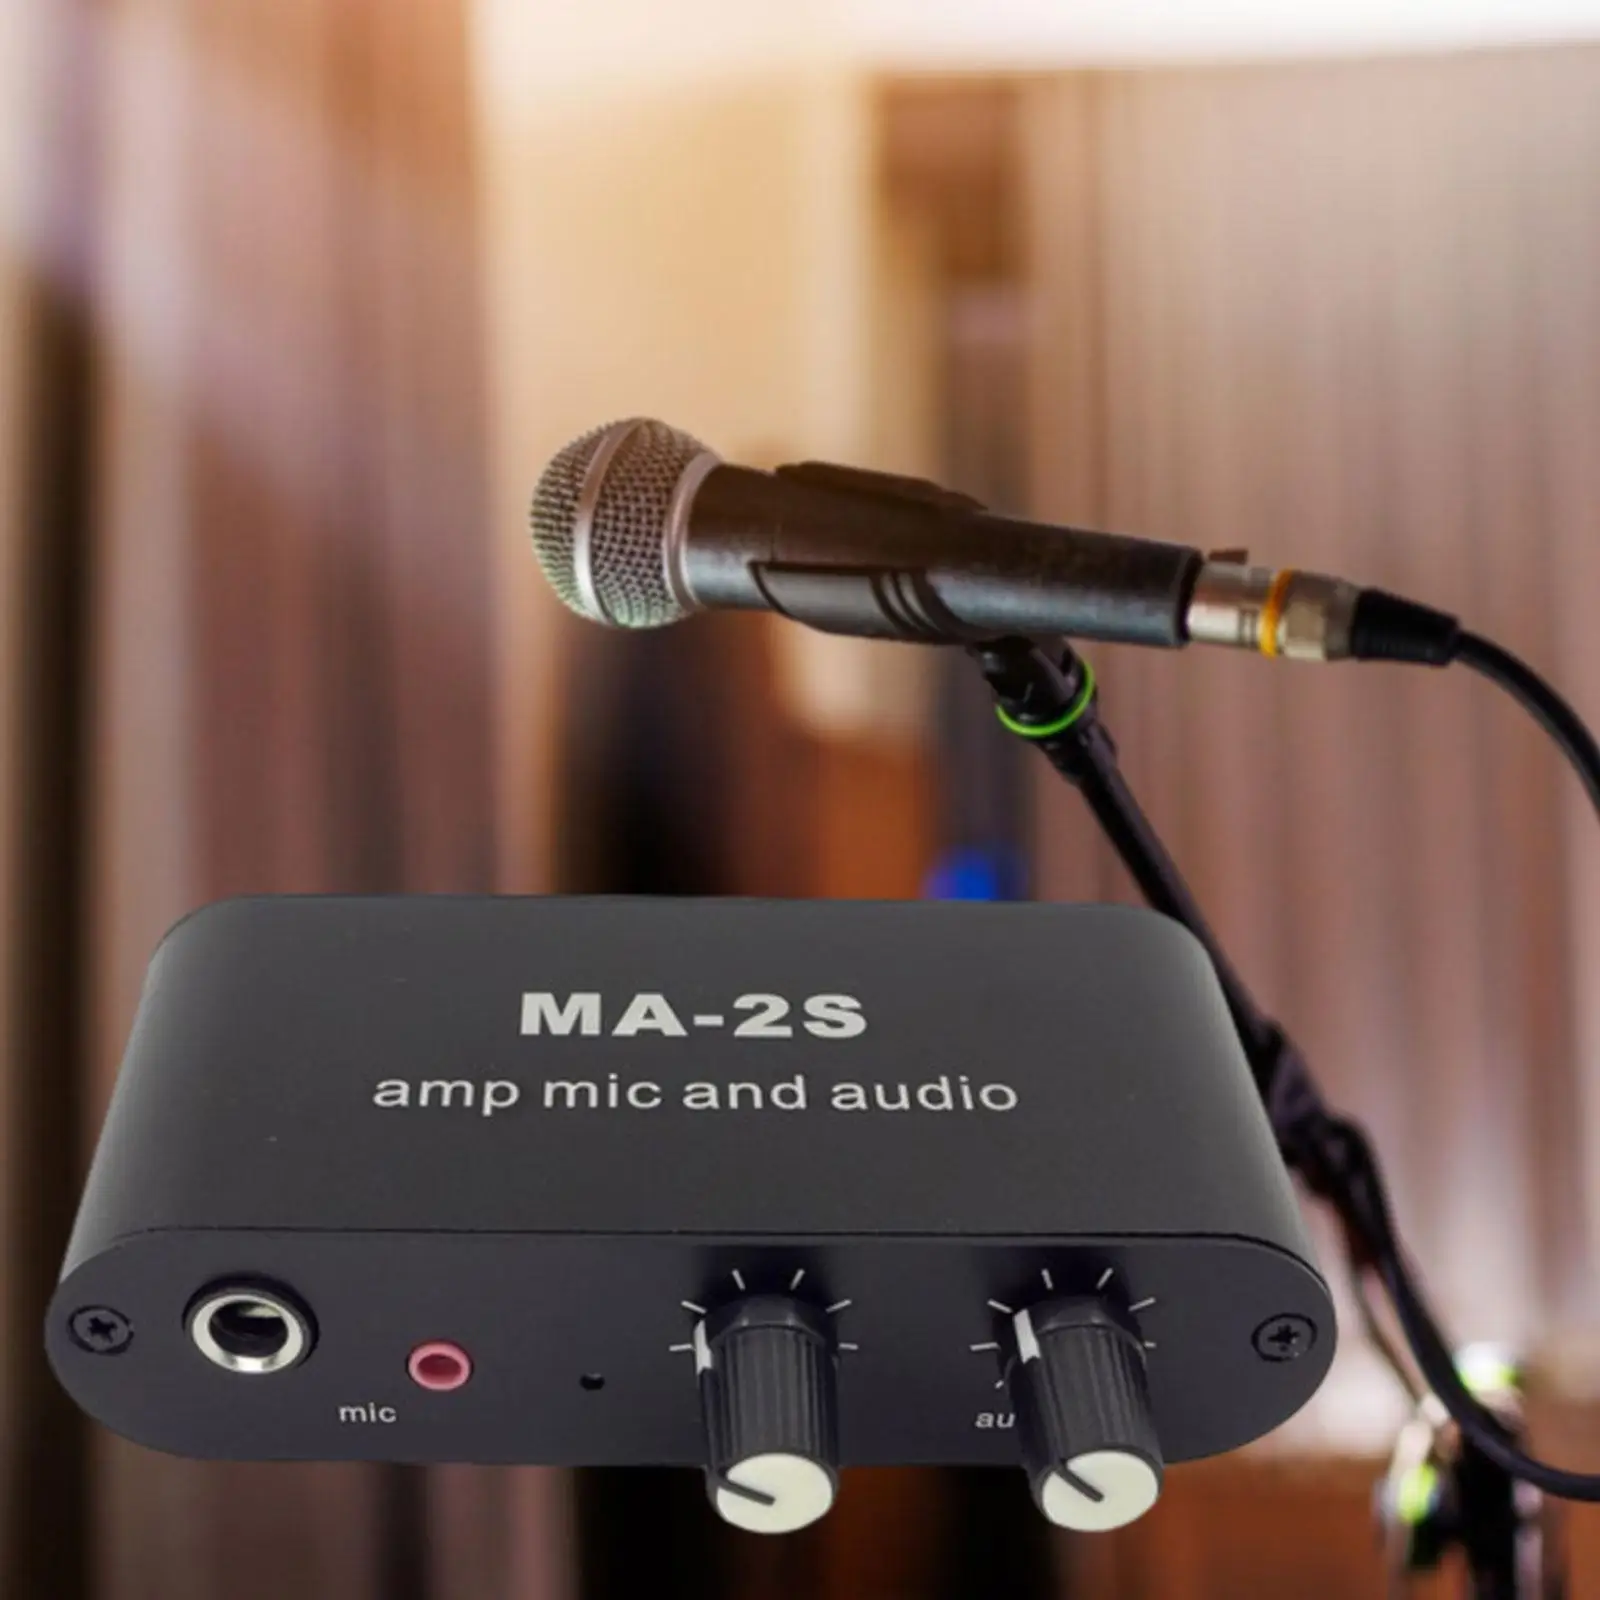 Condenser Microphone Amplifier Professional Durable Microphone Preamp for Podcasts Studio Recording Singing Live Performances